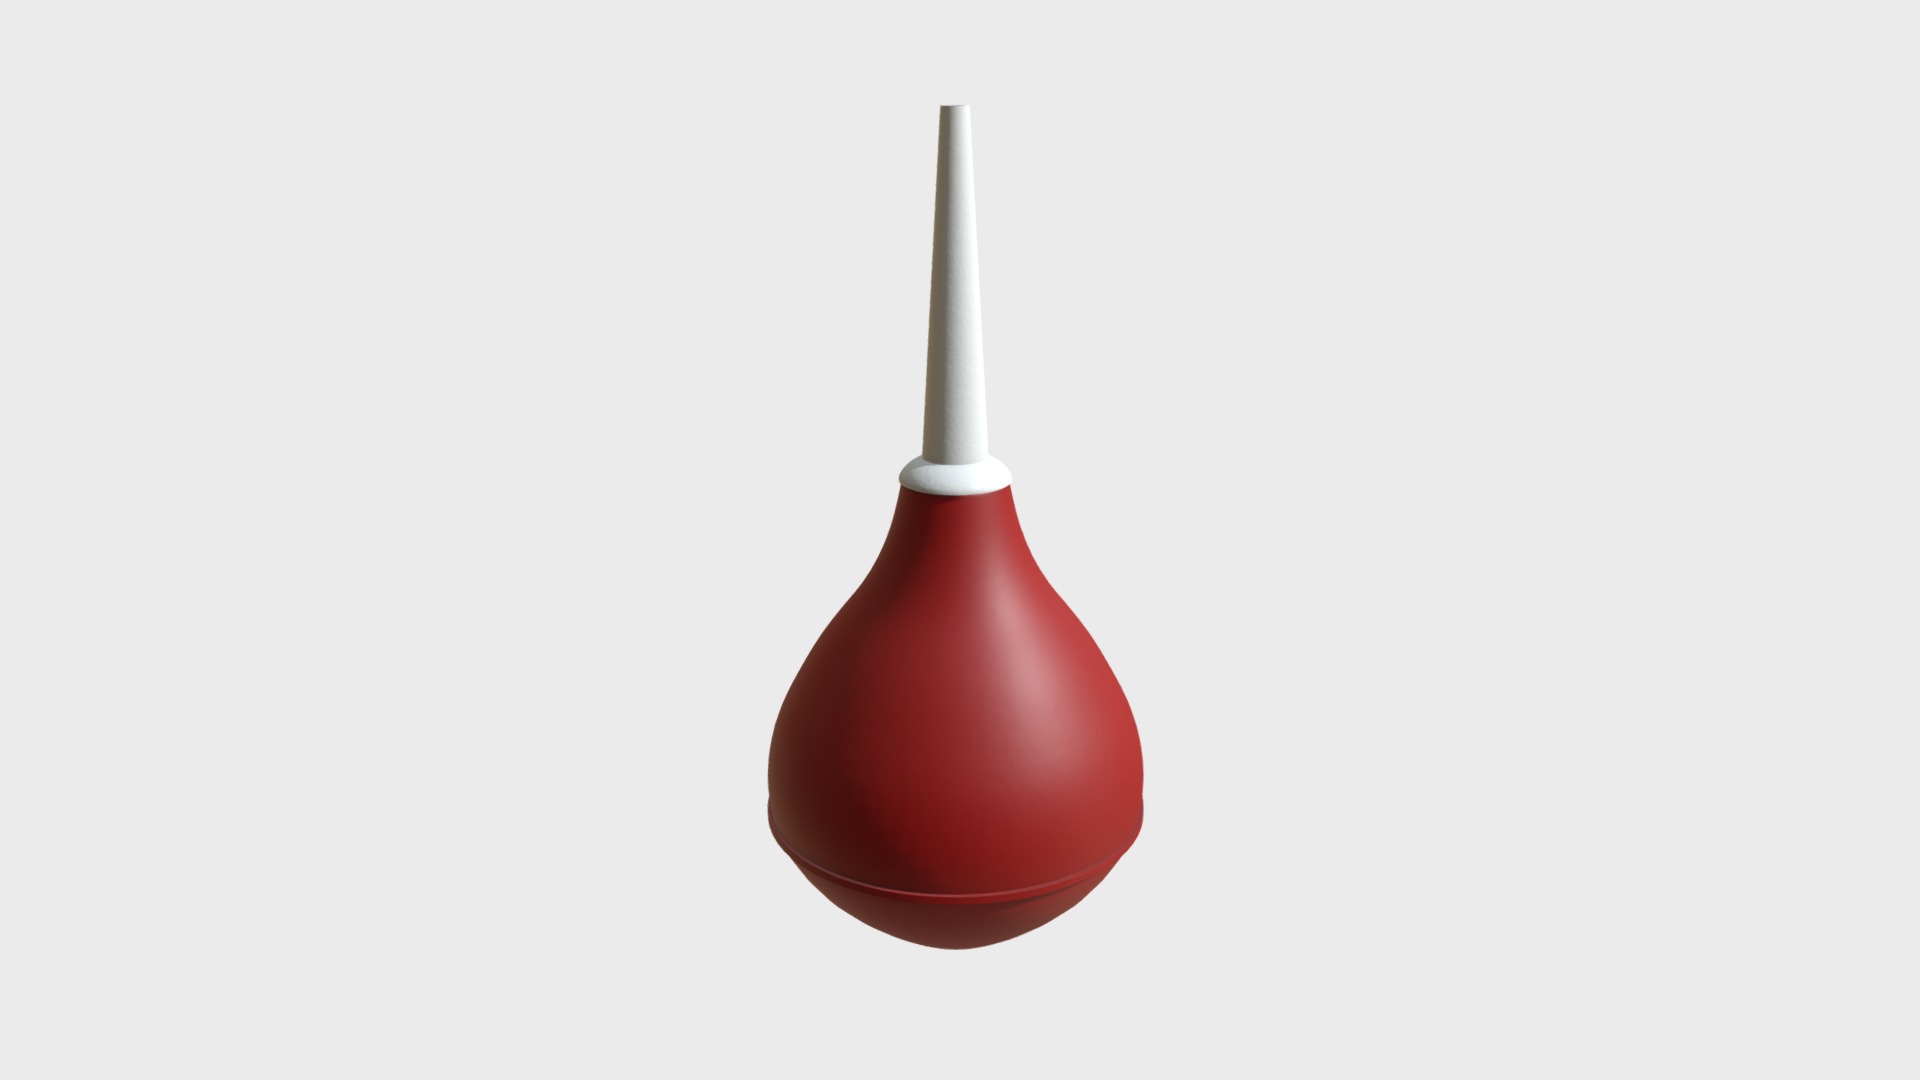 3D model Bulb syringe 1 - This is a 3D model of the Bulb syringe 1. The 3D model is about a red and white object.